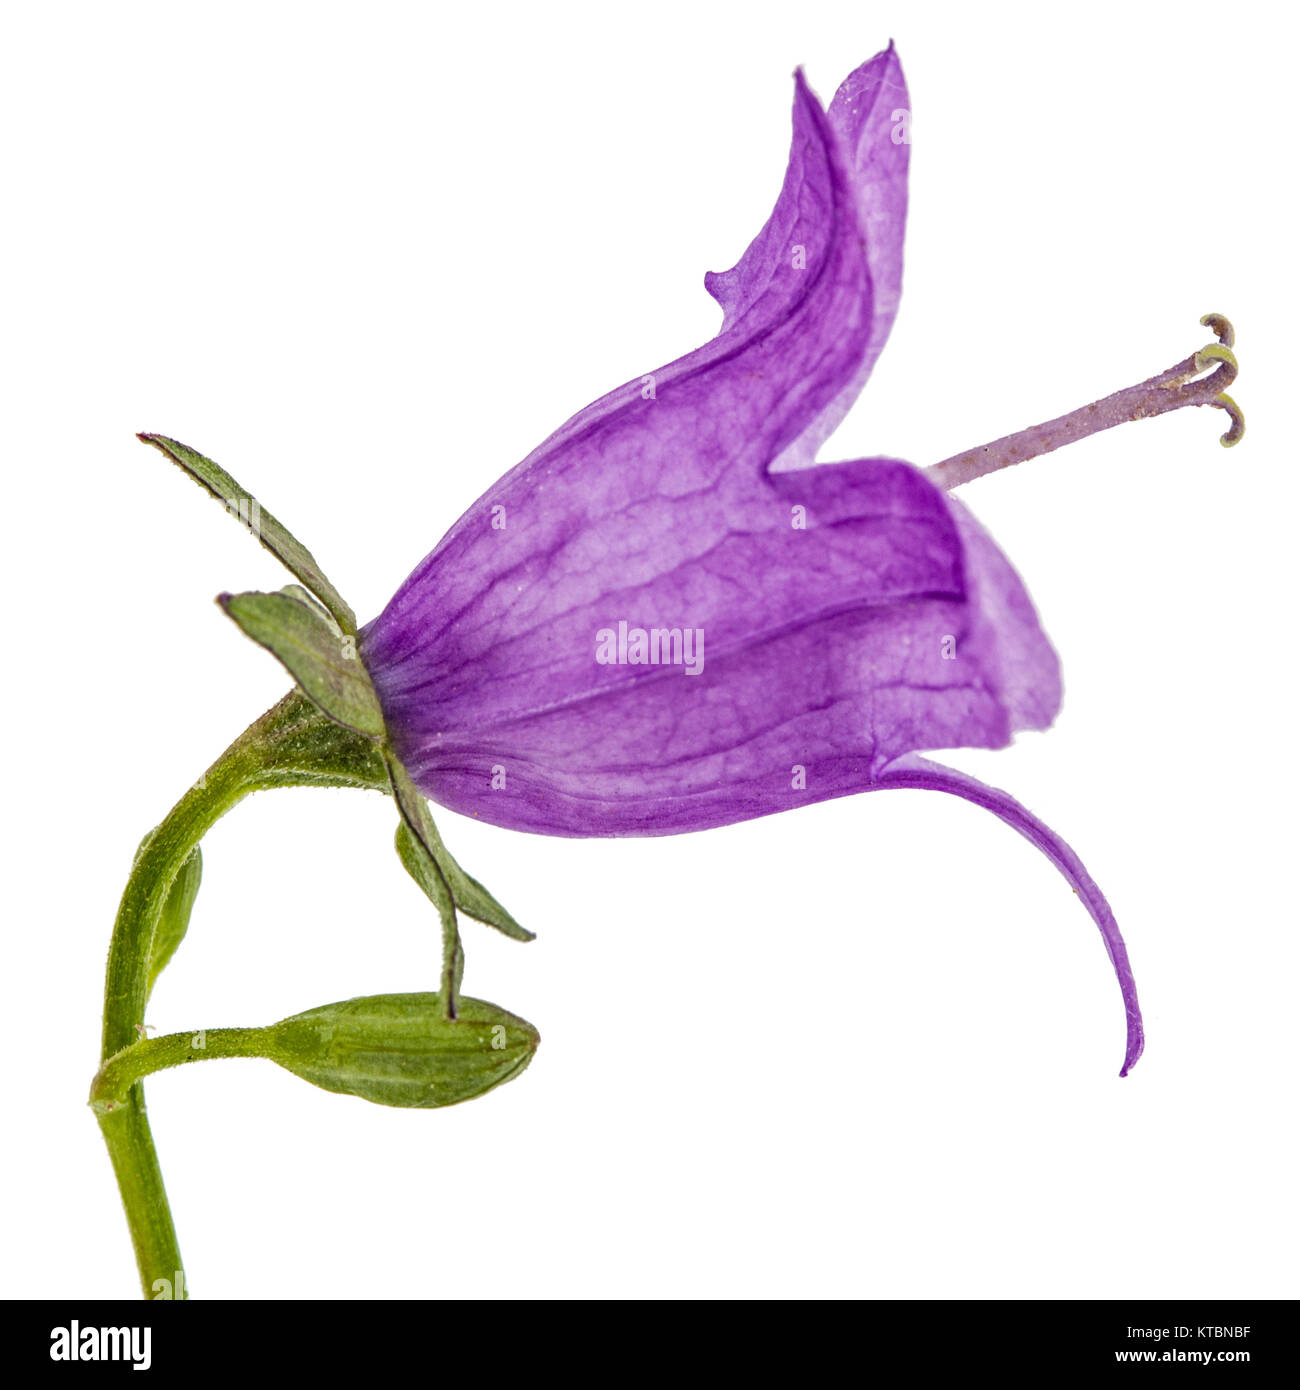 Violet flower of Campanula, isolated on white background Stock Photo